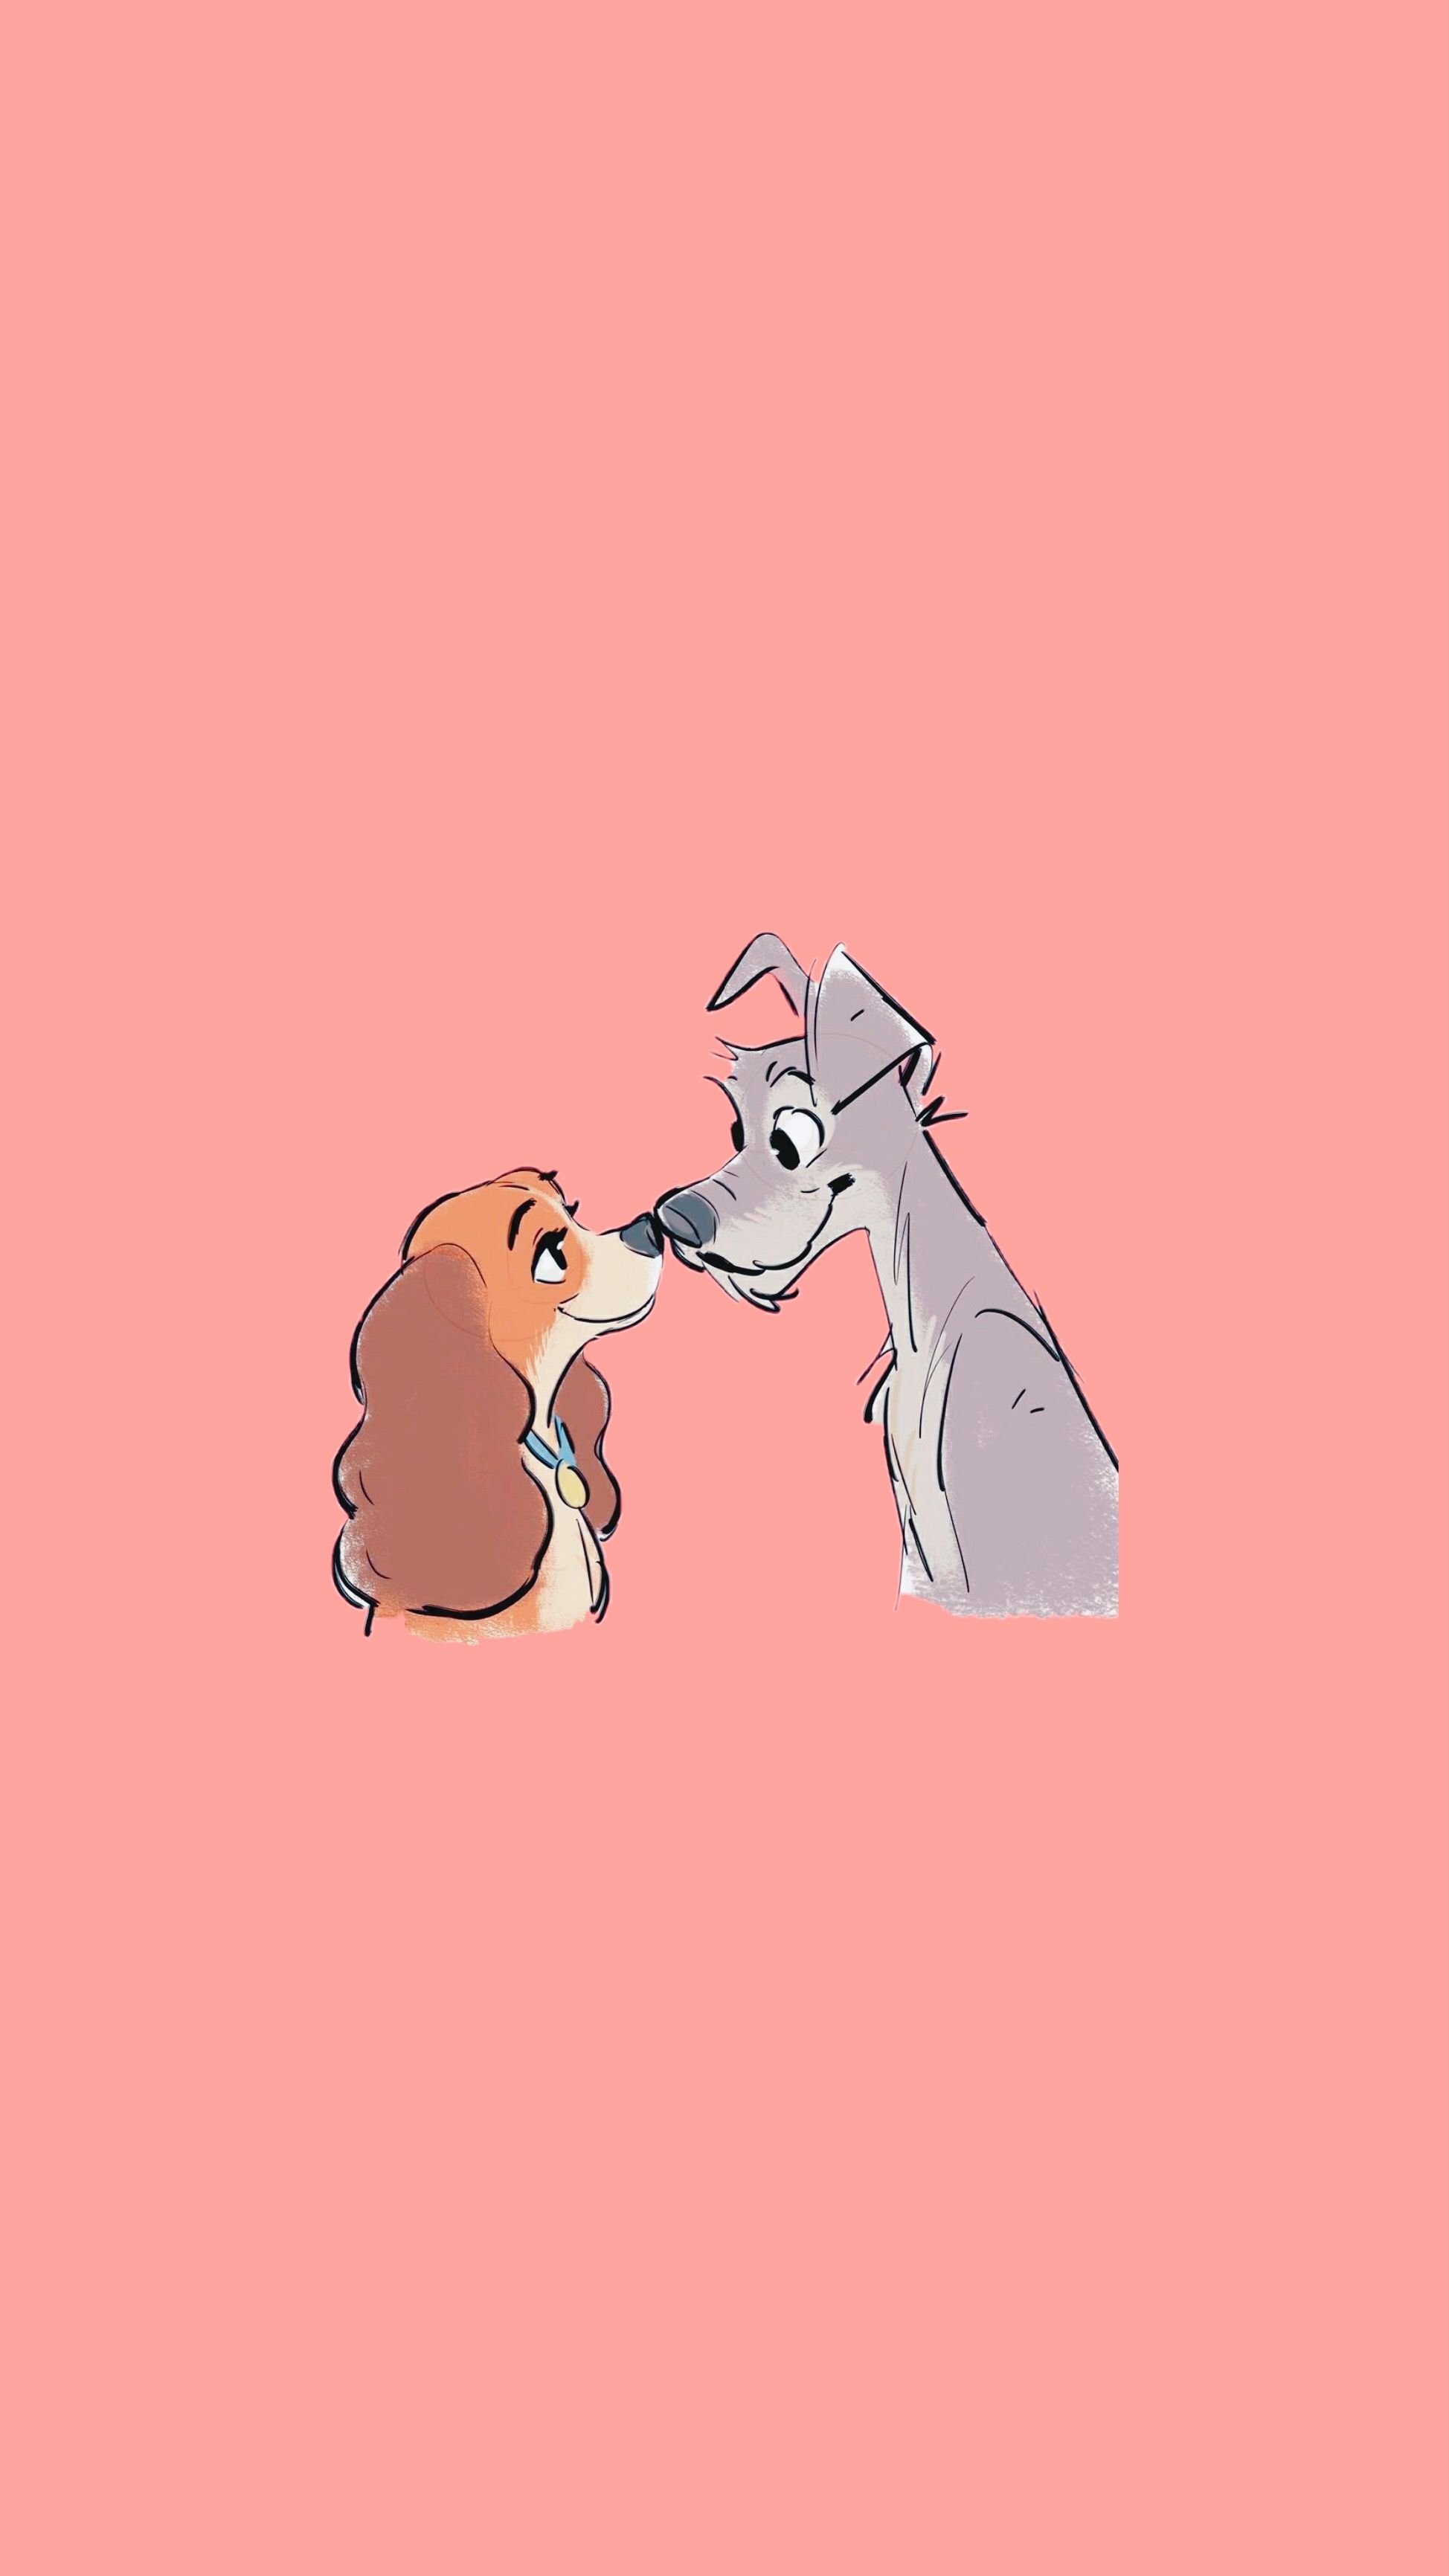 Lady and Trump. Disney characters wallpaper, Cute disney wallpaper, Cute cartoon wallpaper